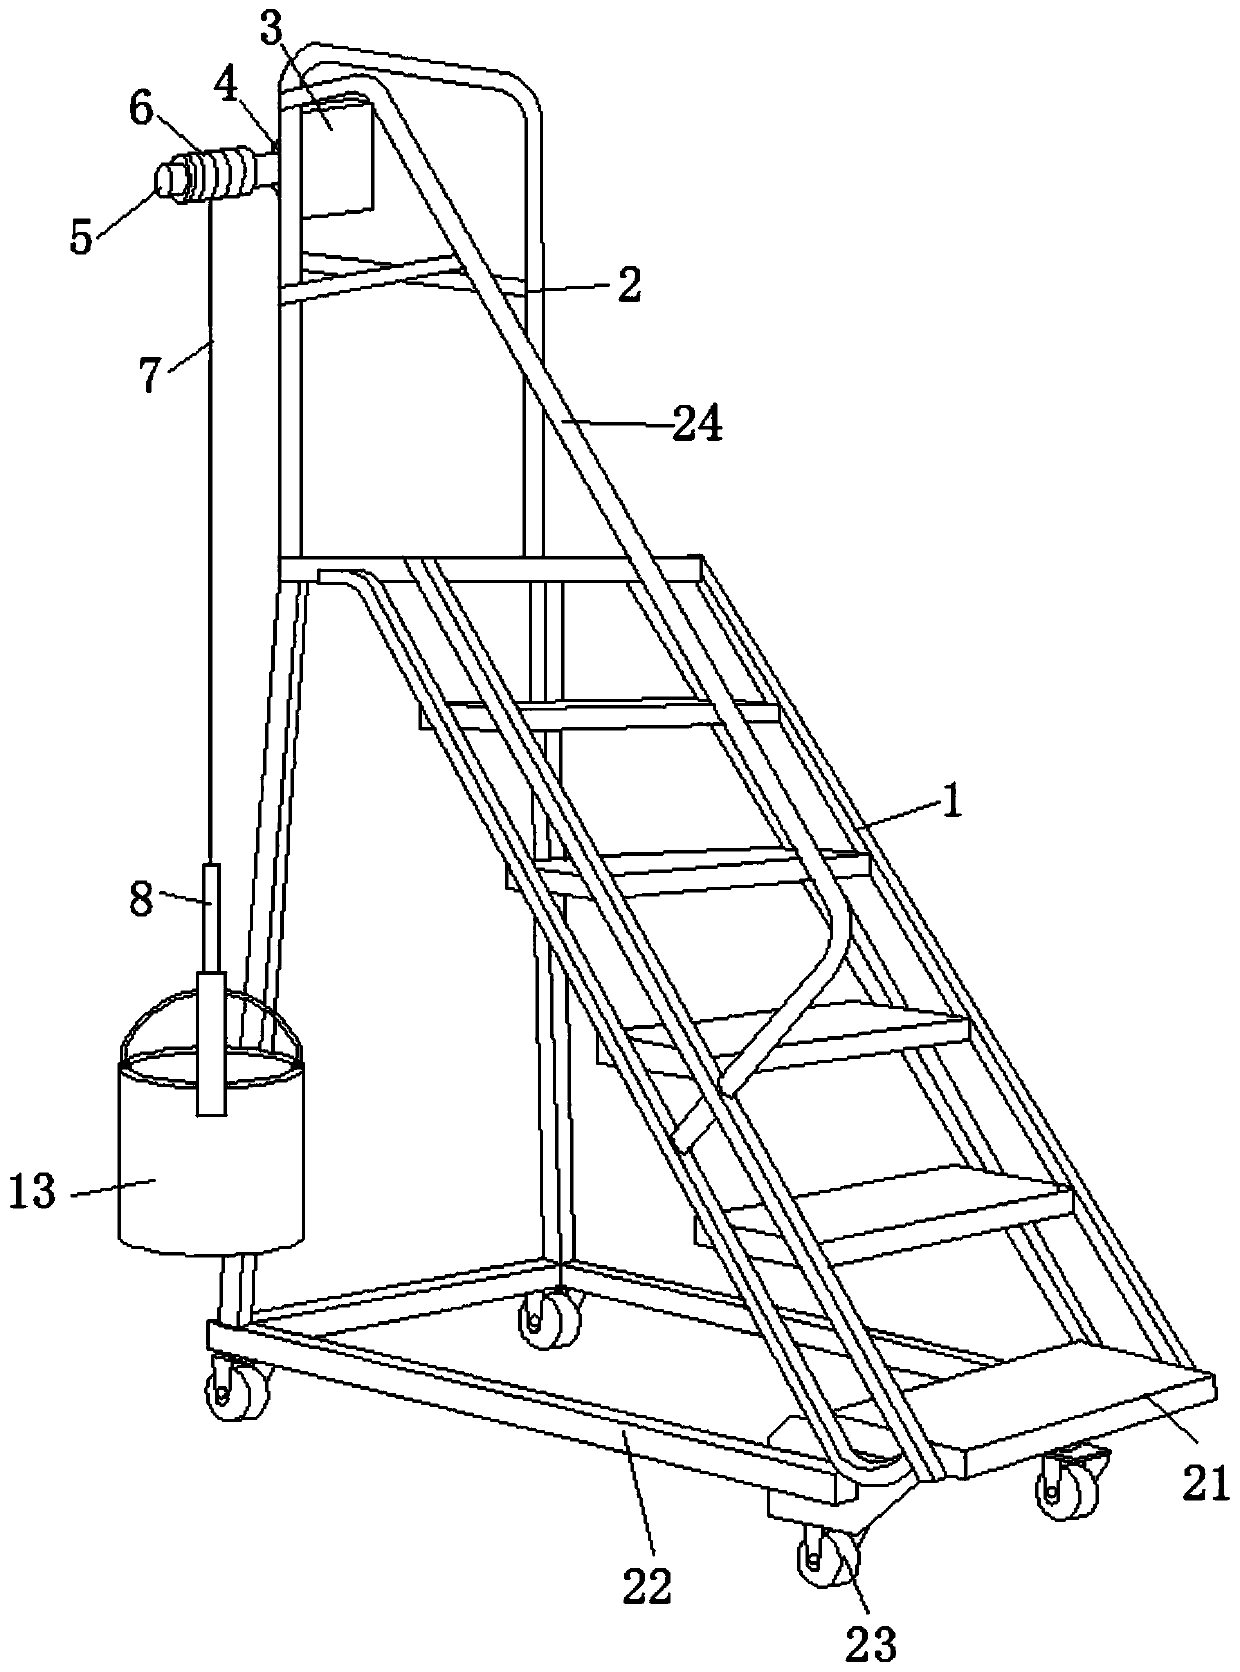 Decorative moving ladder for wall painting capable of hoisting articles